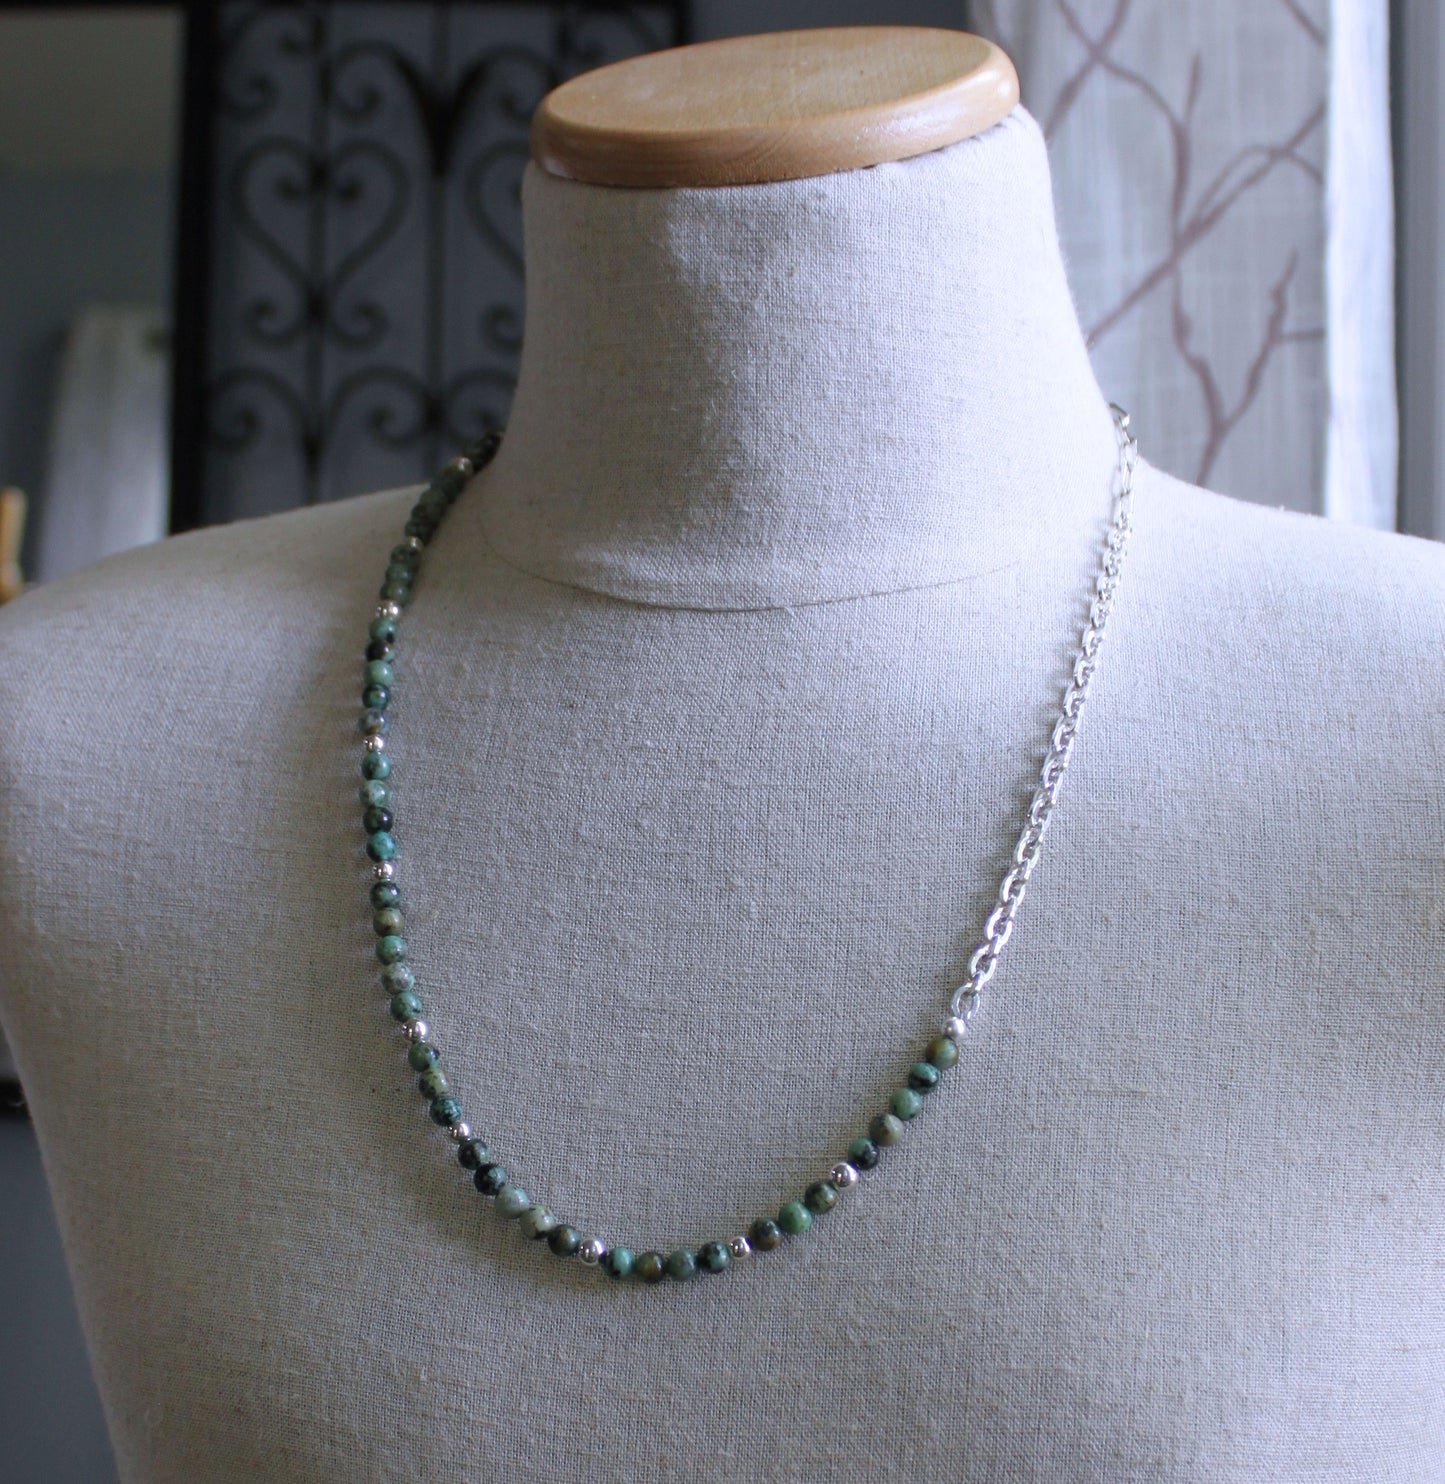 Men's African Turquoise Bead Necklace